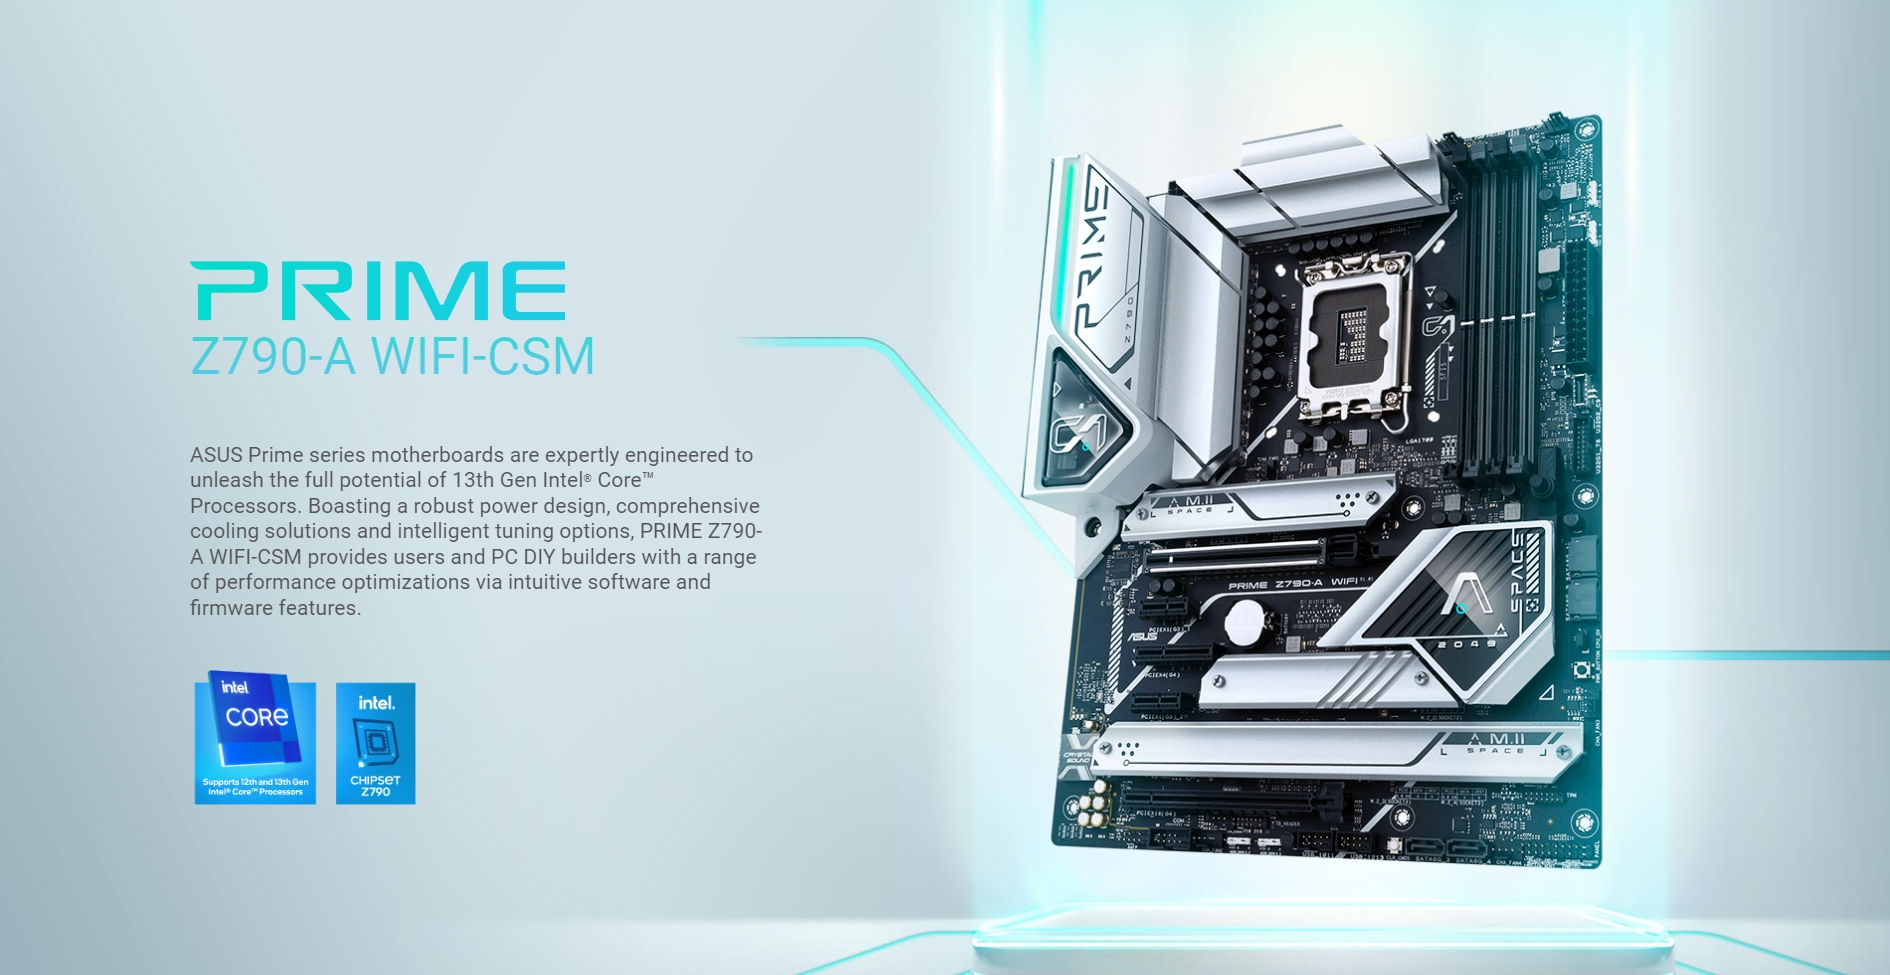 ASUS-PRIME-Z790-A-WIFI-CSM-DDR5-Motherboard